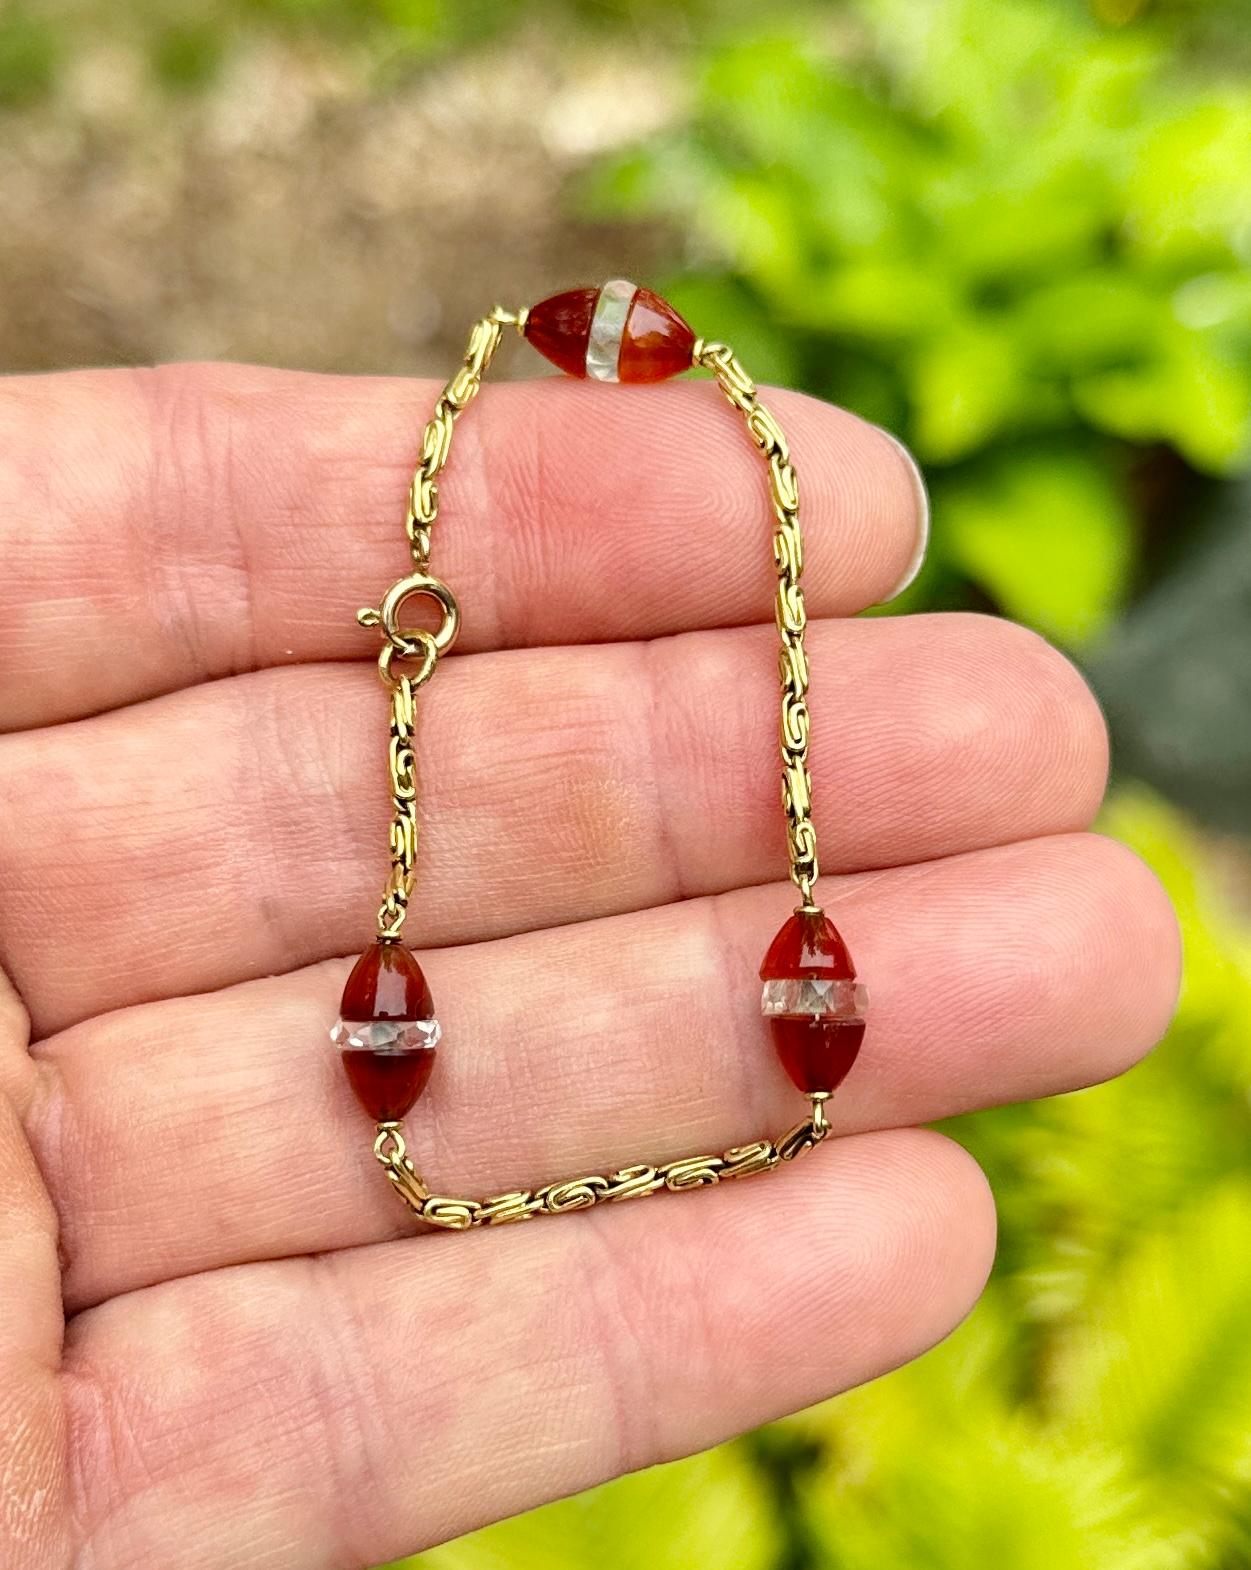 Indulge in a radiant Art Deco Carnelian and Rock Crystal 18 Karat Gold Bracelet. The exquisite antique Art Deco link bracelet is set with three Carnelian and Rock Crystal Rondelles. The rondelles have torpedo shaped ends of fine Carnelian gems with